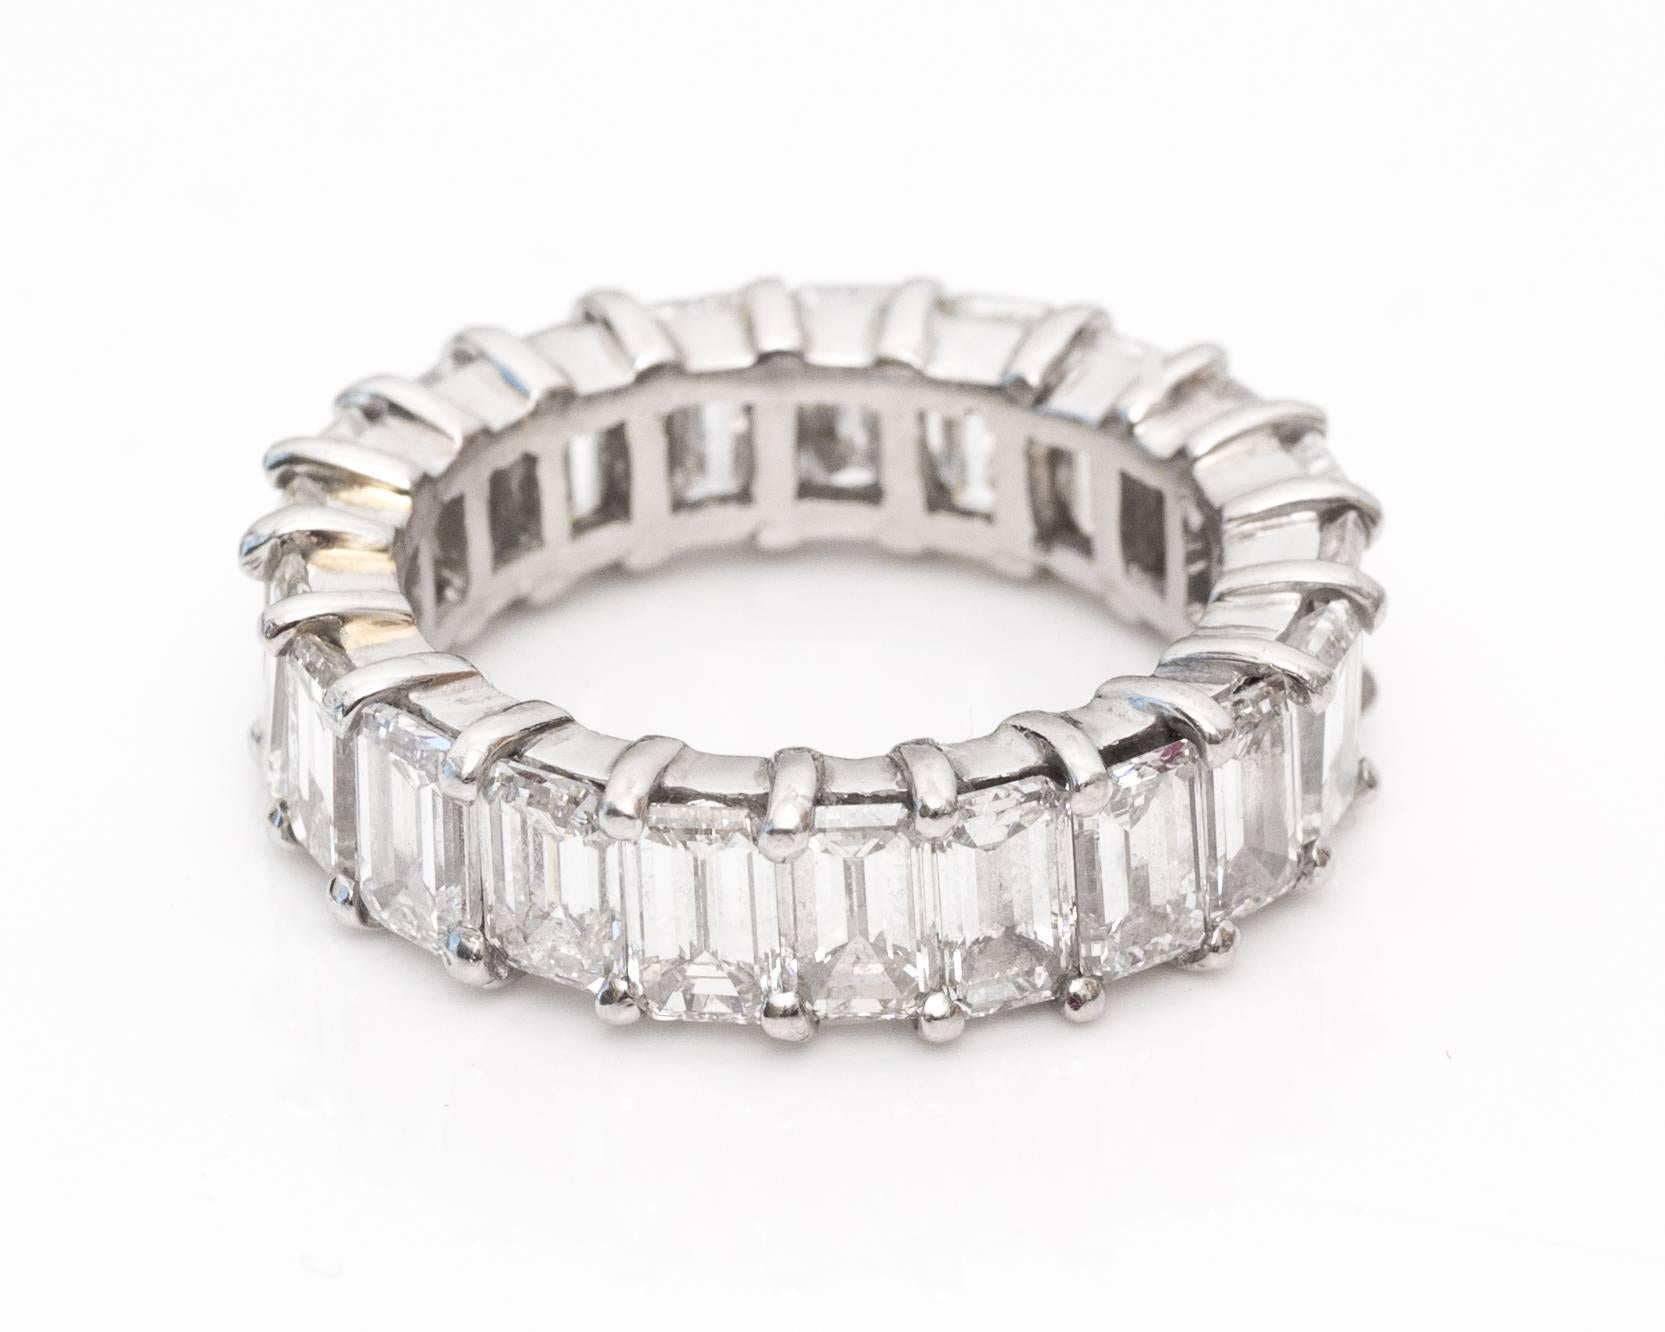 10 Carat Diamond Eternity Band, Platinum Crafted
Emerald Cut Diamonds
H Color, VS Clarity 
All Prong Set Diamonds
Fits Ring Size 8.25
The diamonds can be set into a new style setting and can be made to most sizes.

5.5 millimeter x 3.8 millimeter